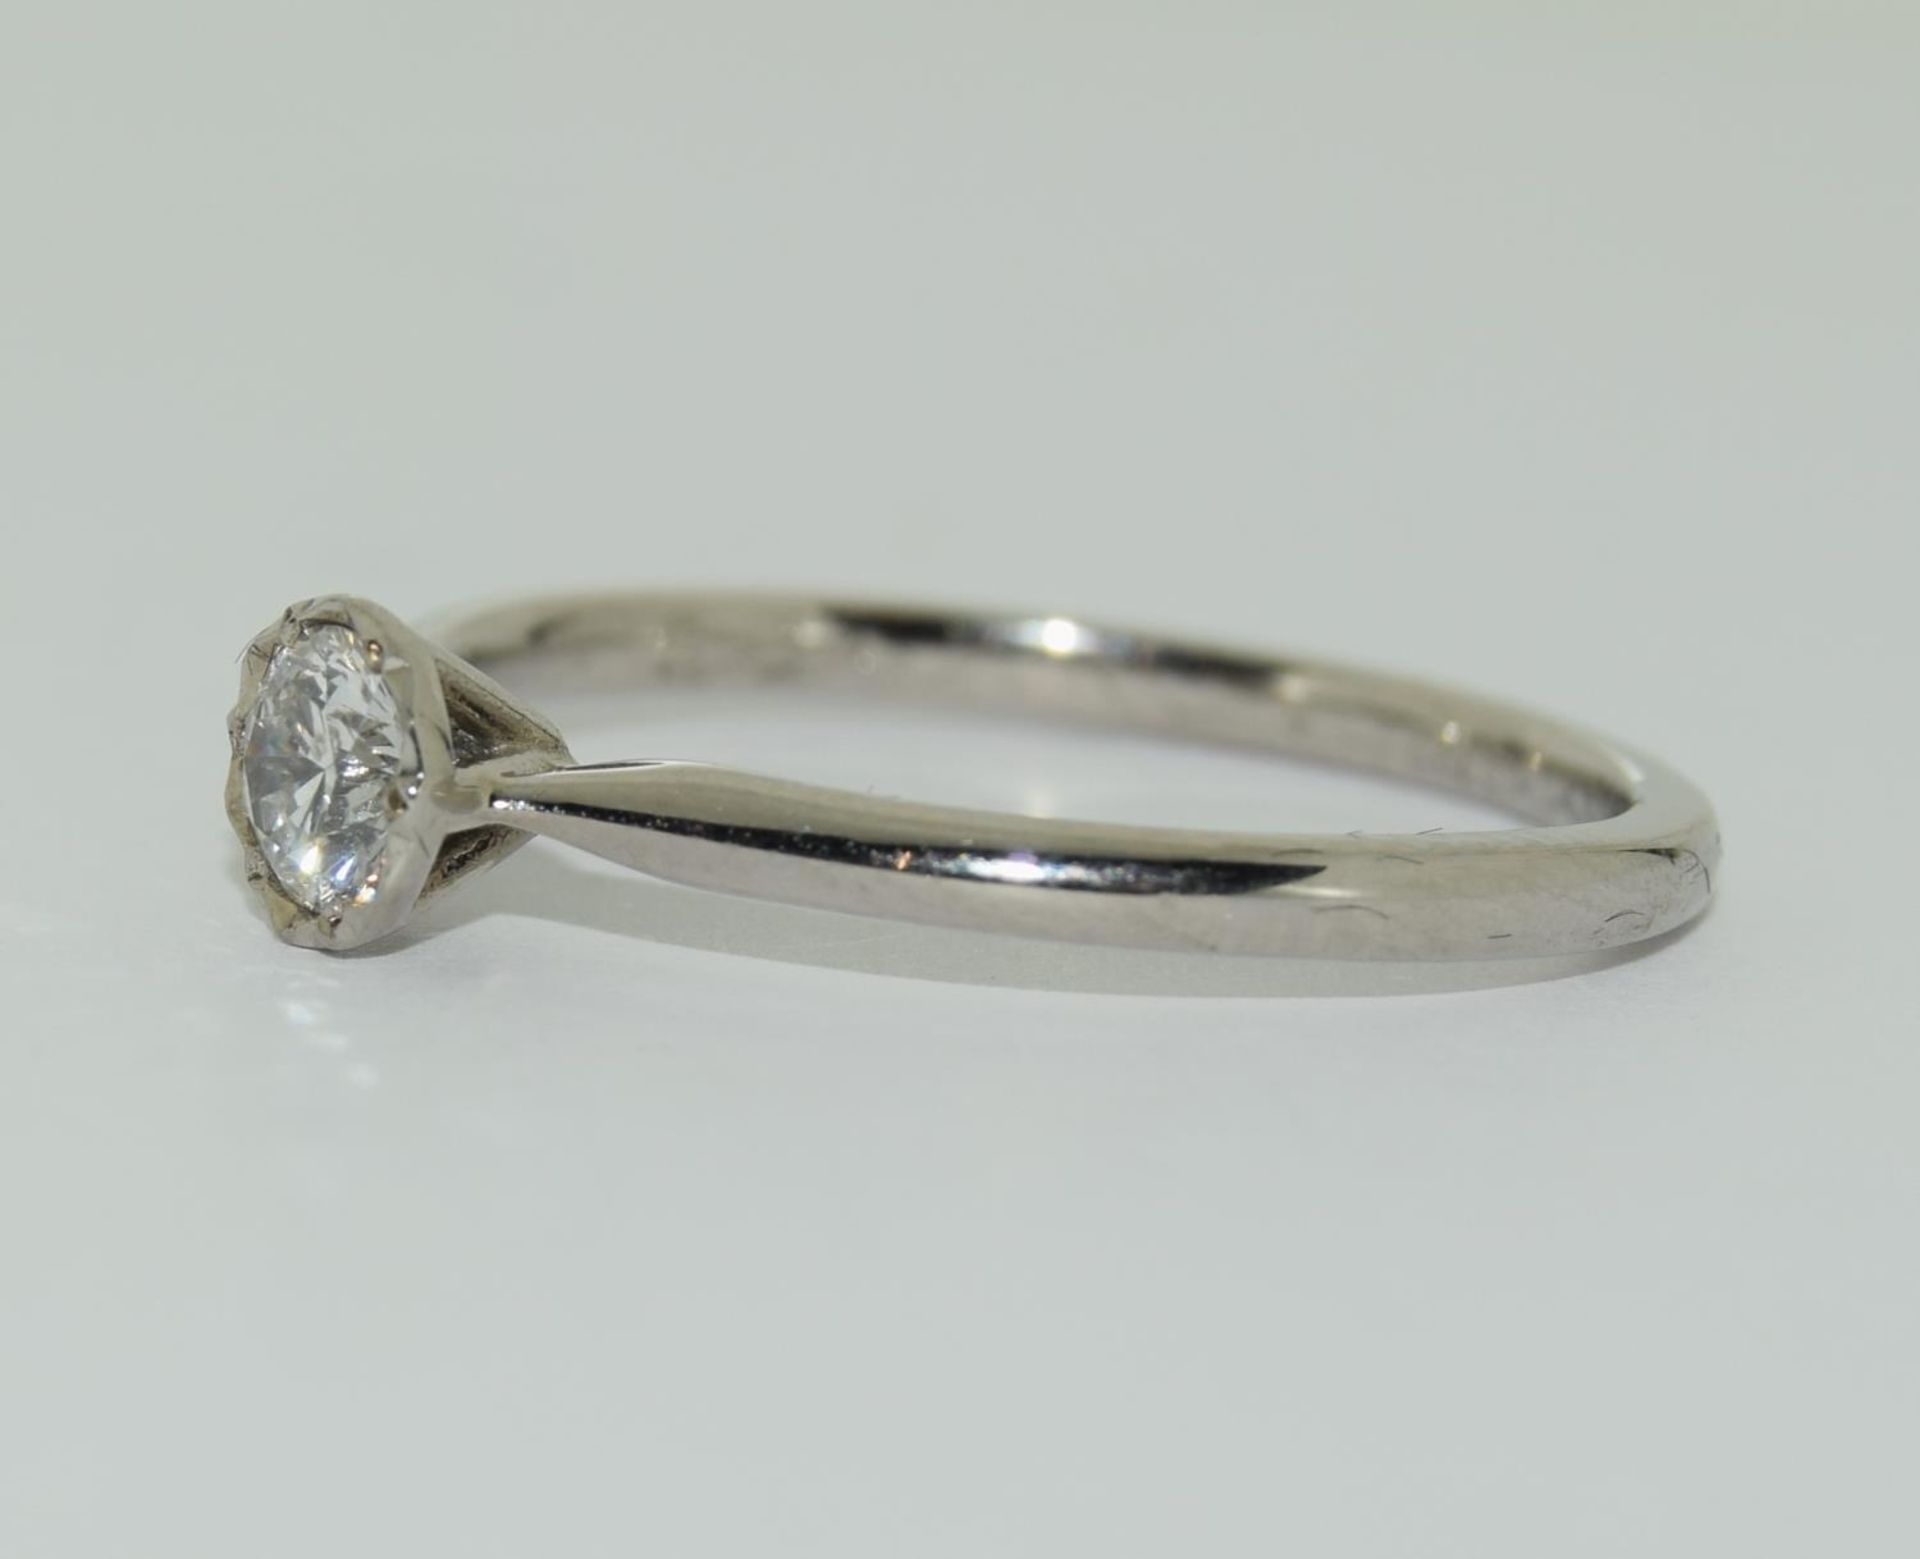 Palladium solitaire ring featuring brilliant round cut diamond in an illusion setting total - Image 4 of 5